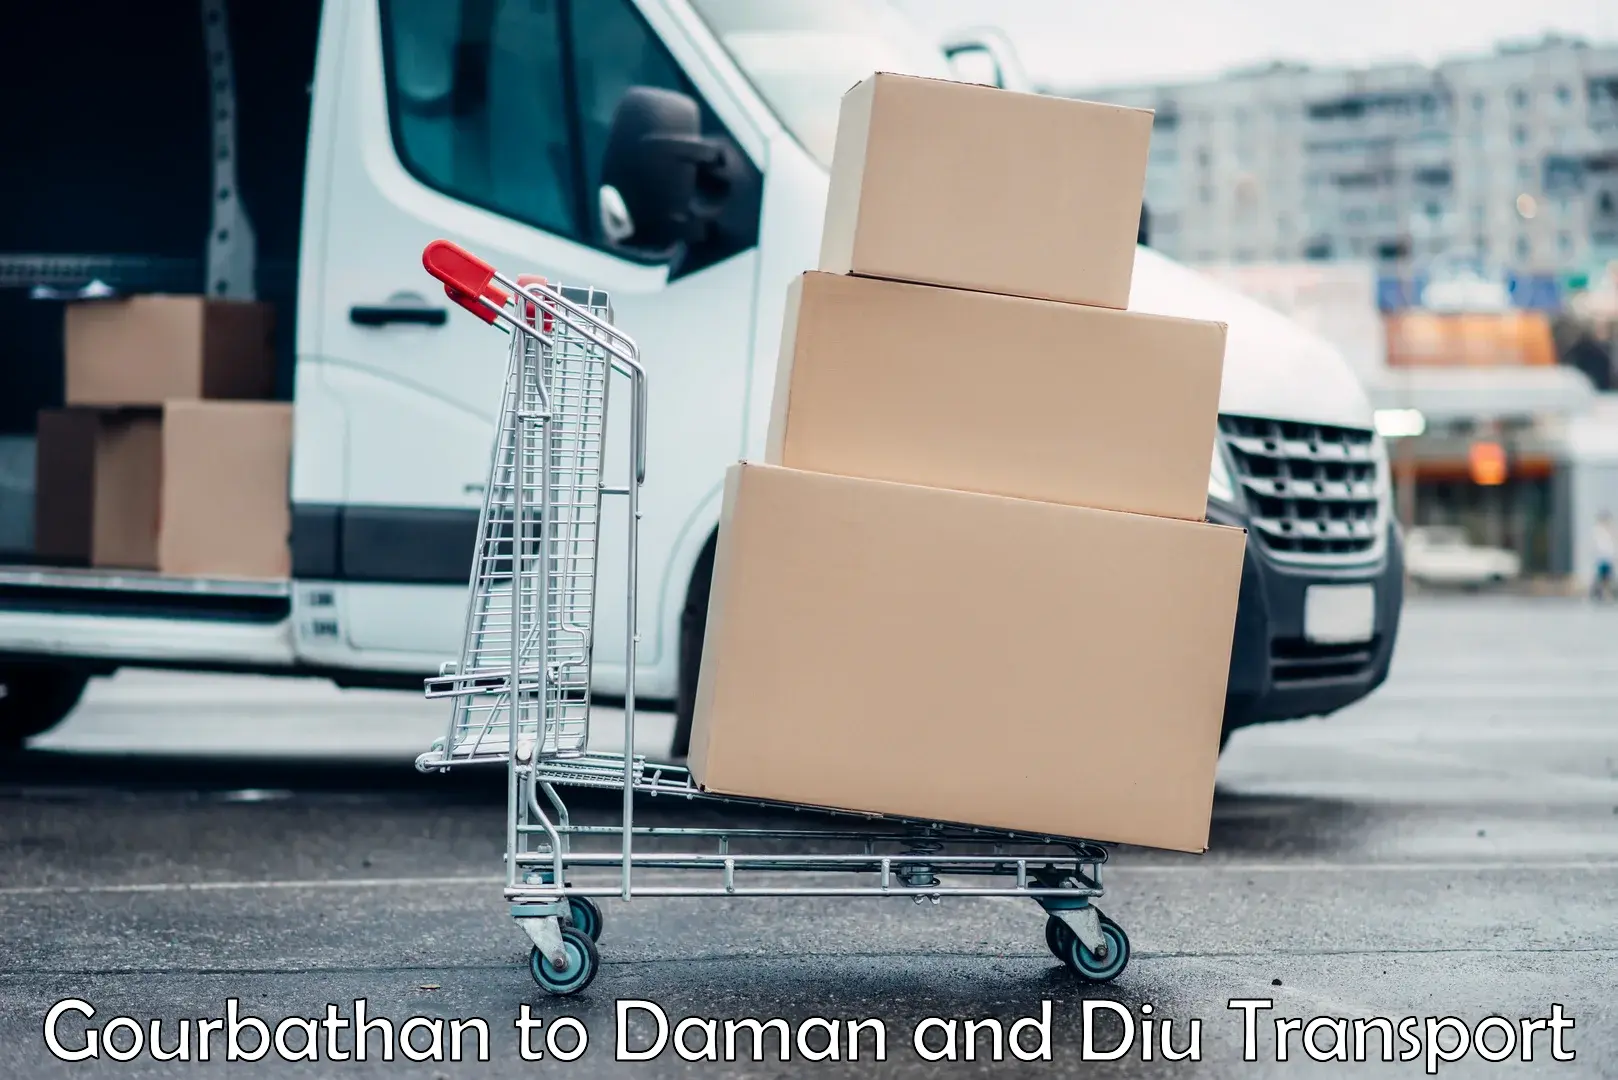 Air cargo transport services in Gourbathan to Daman and Diu